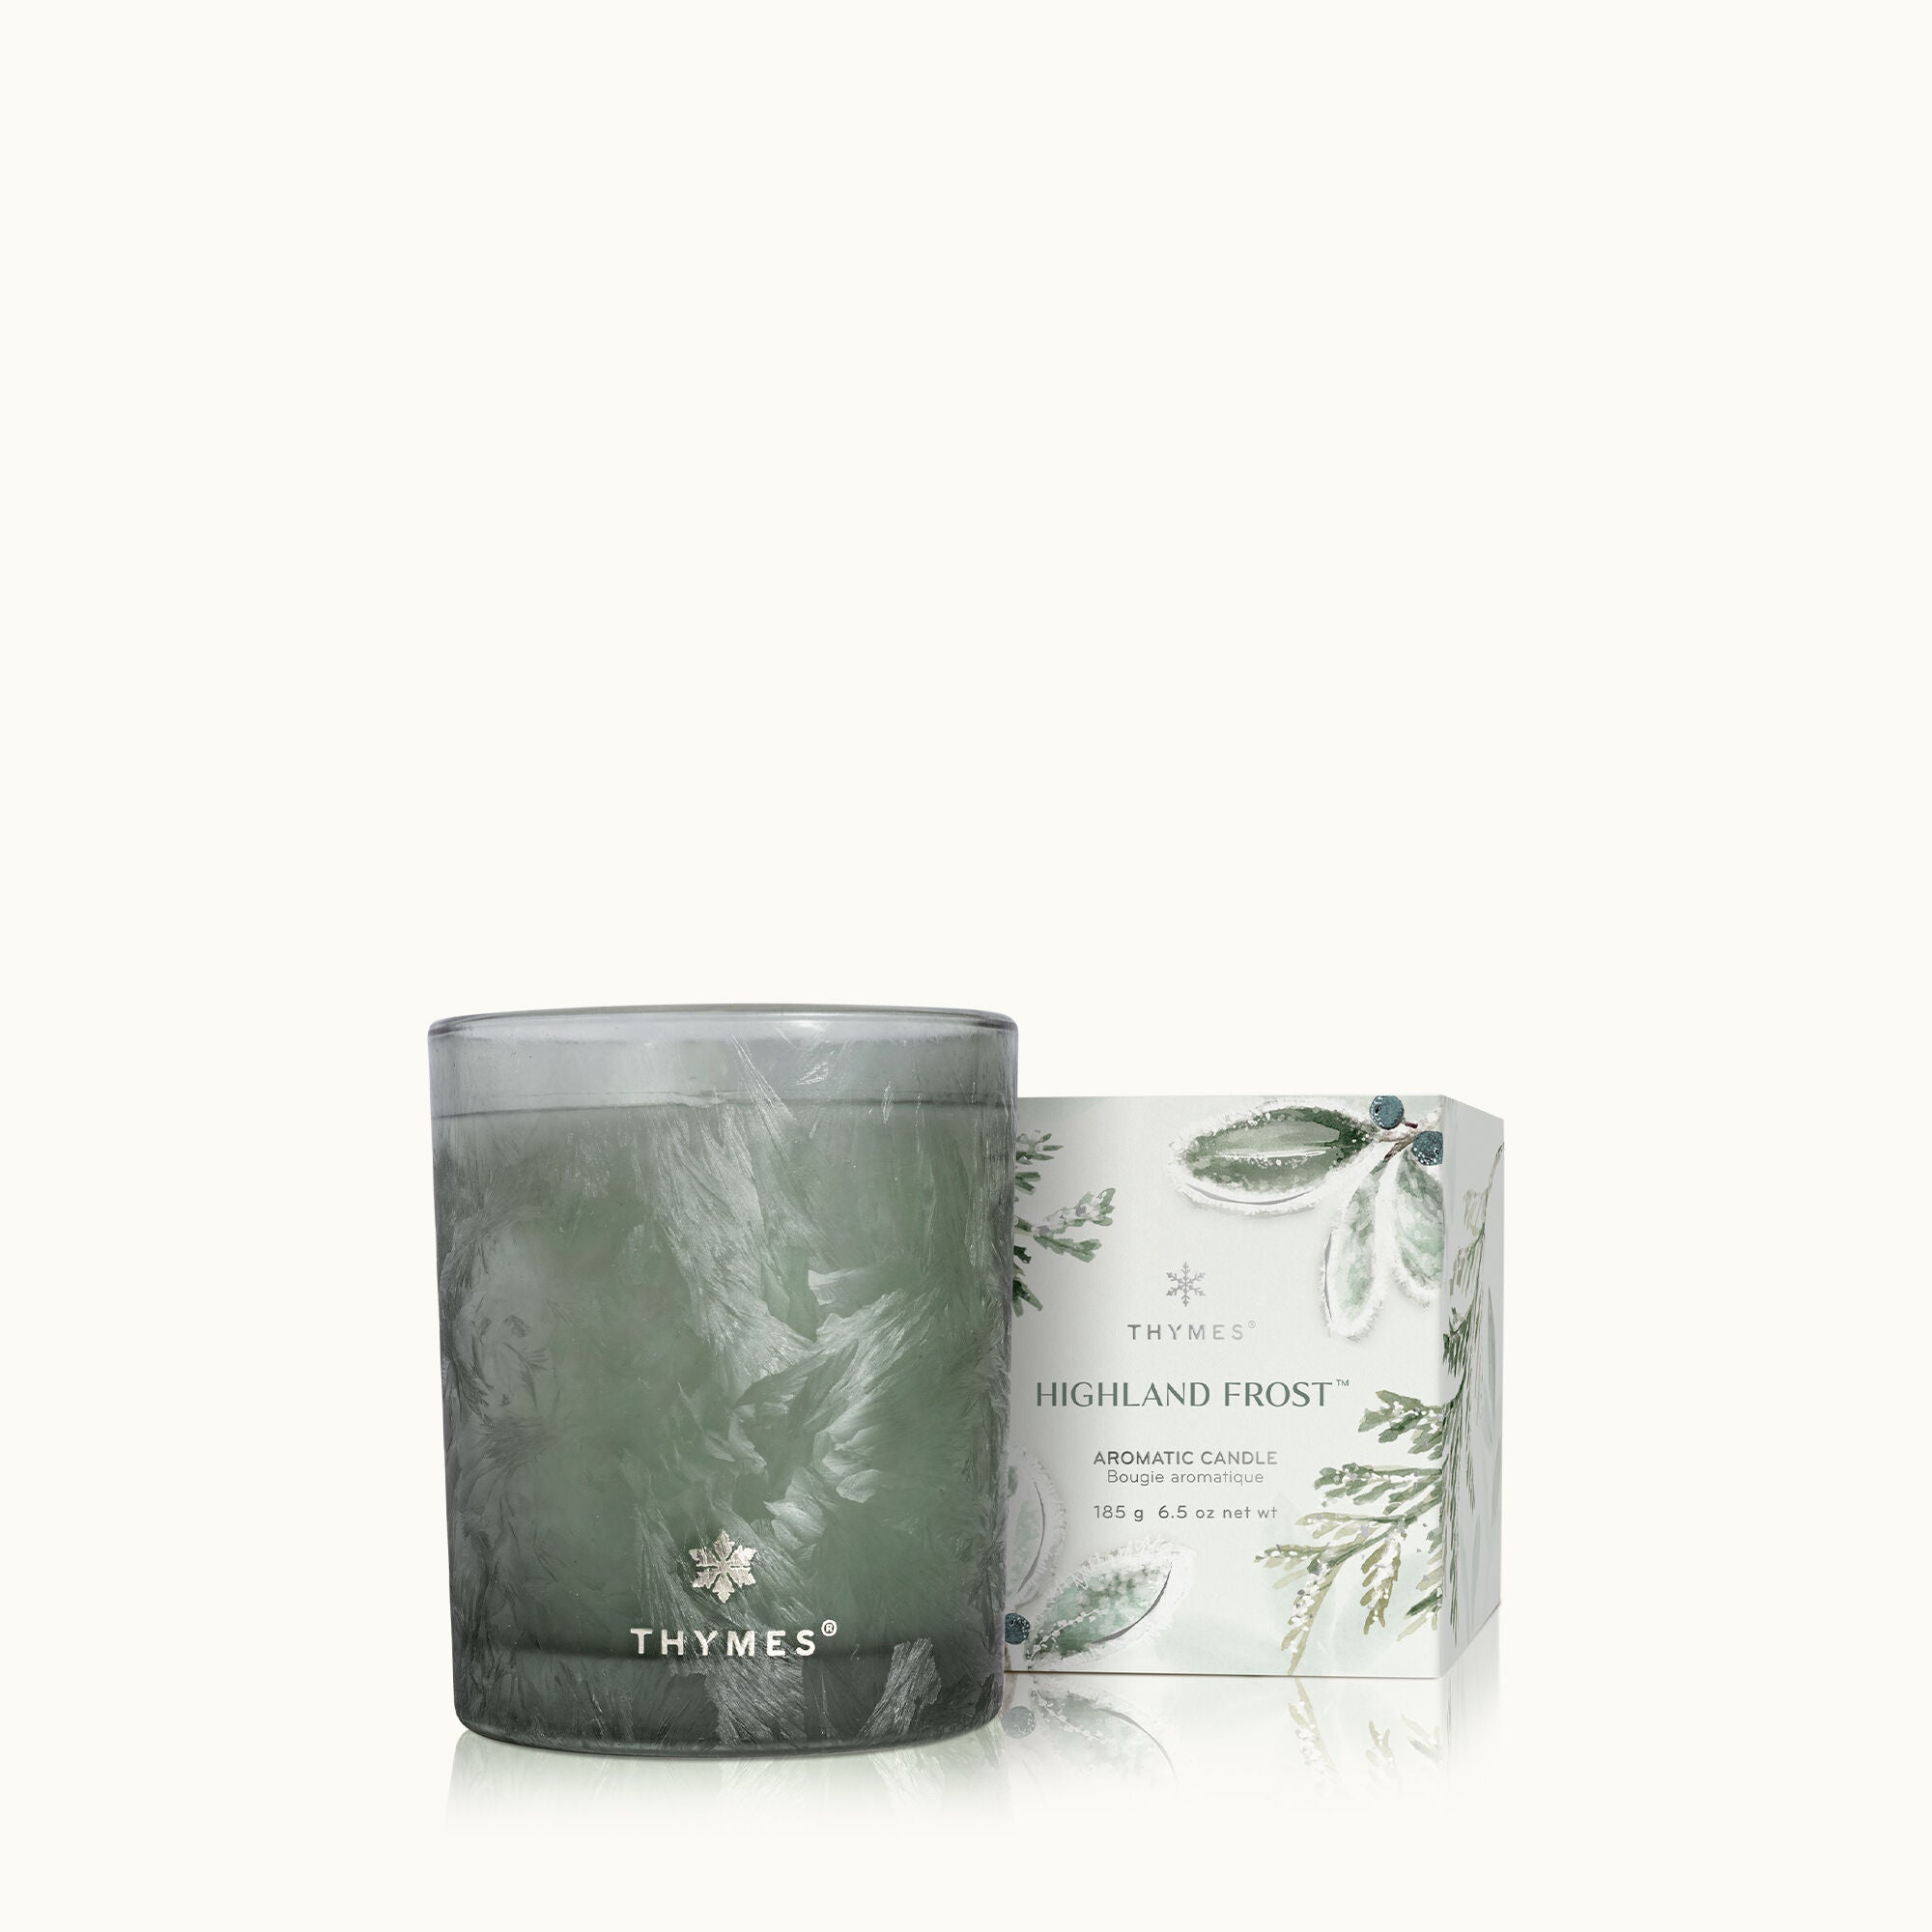 thymes-highland-frost-boxed-aromatic-candle-TH39407141507.jpg